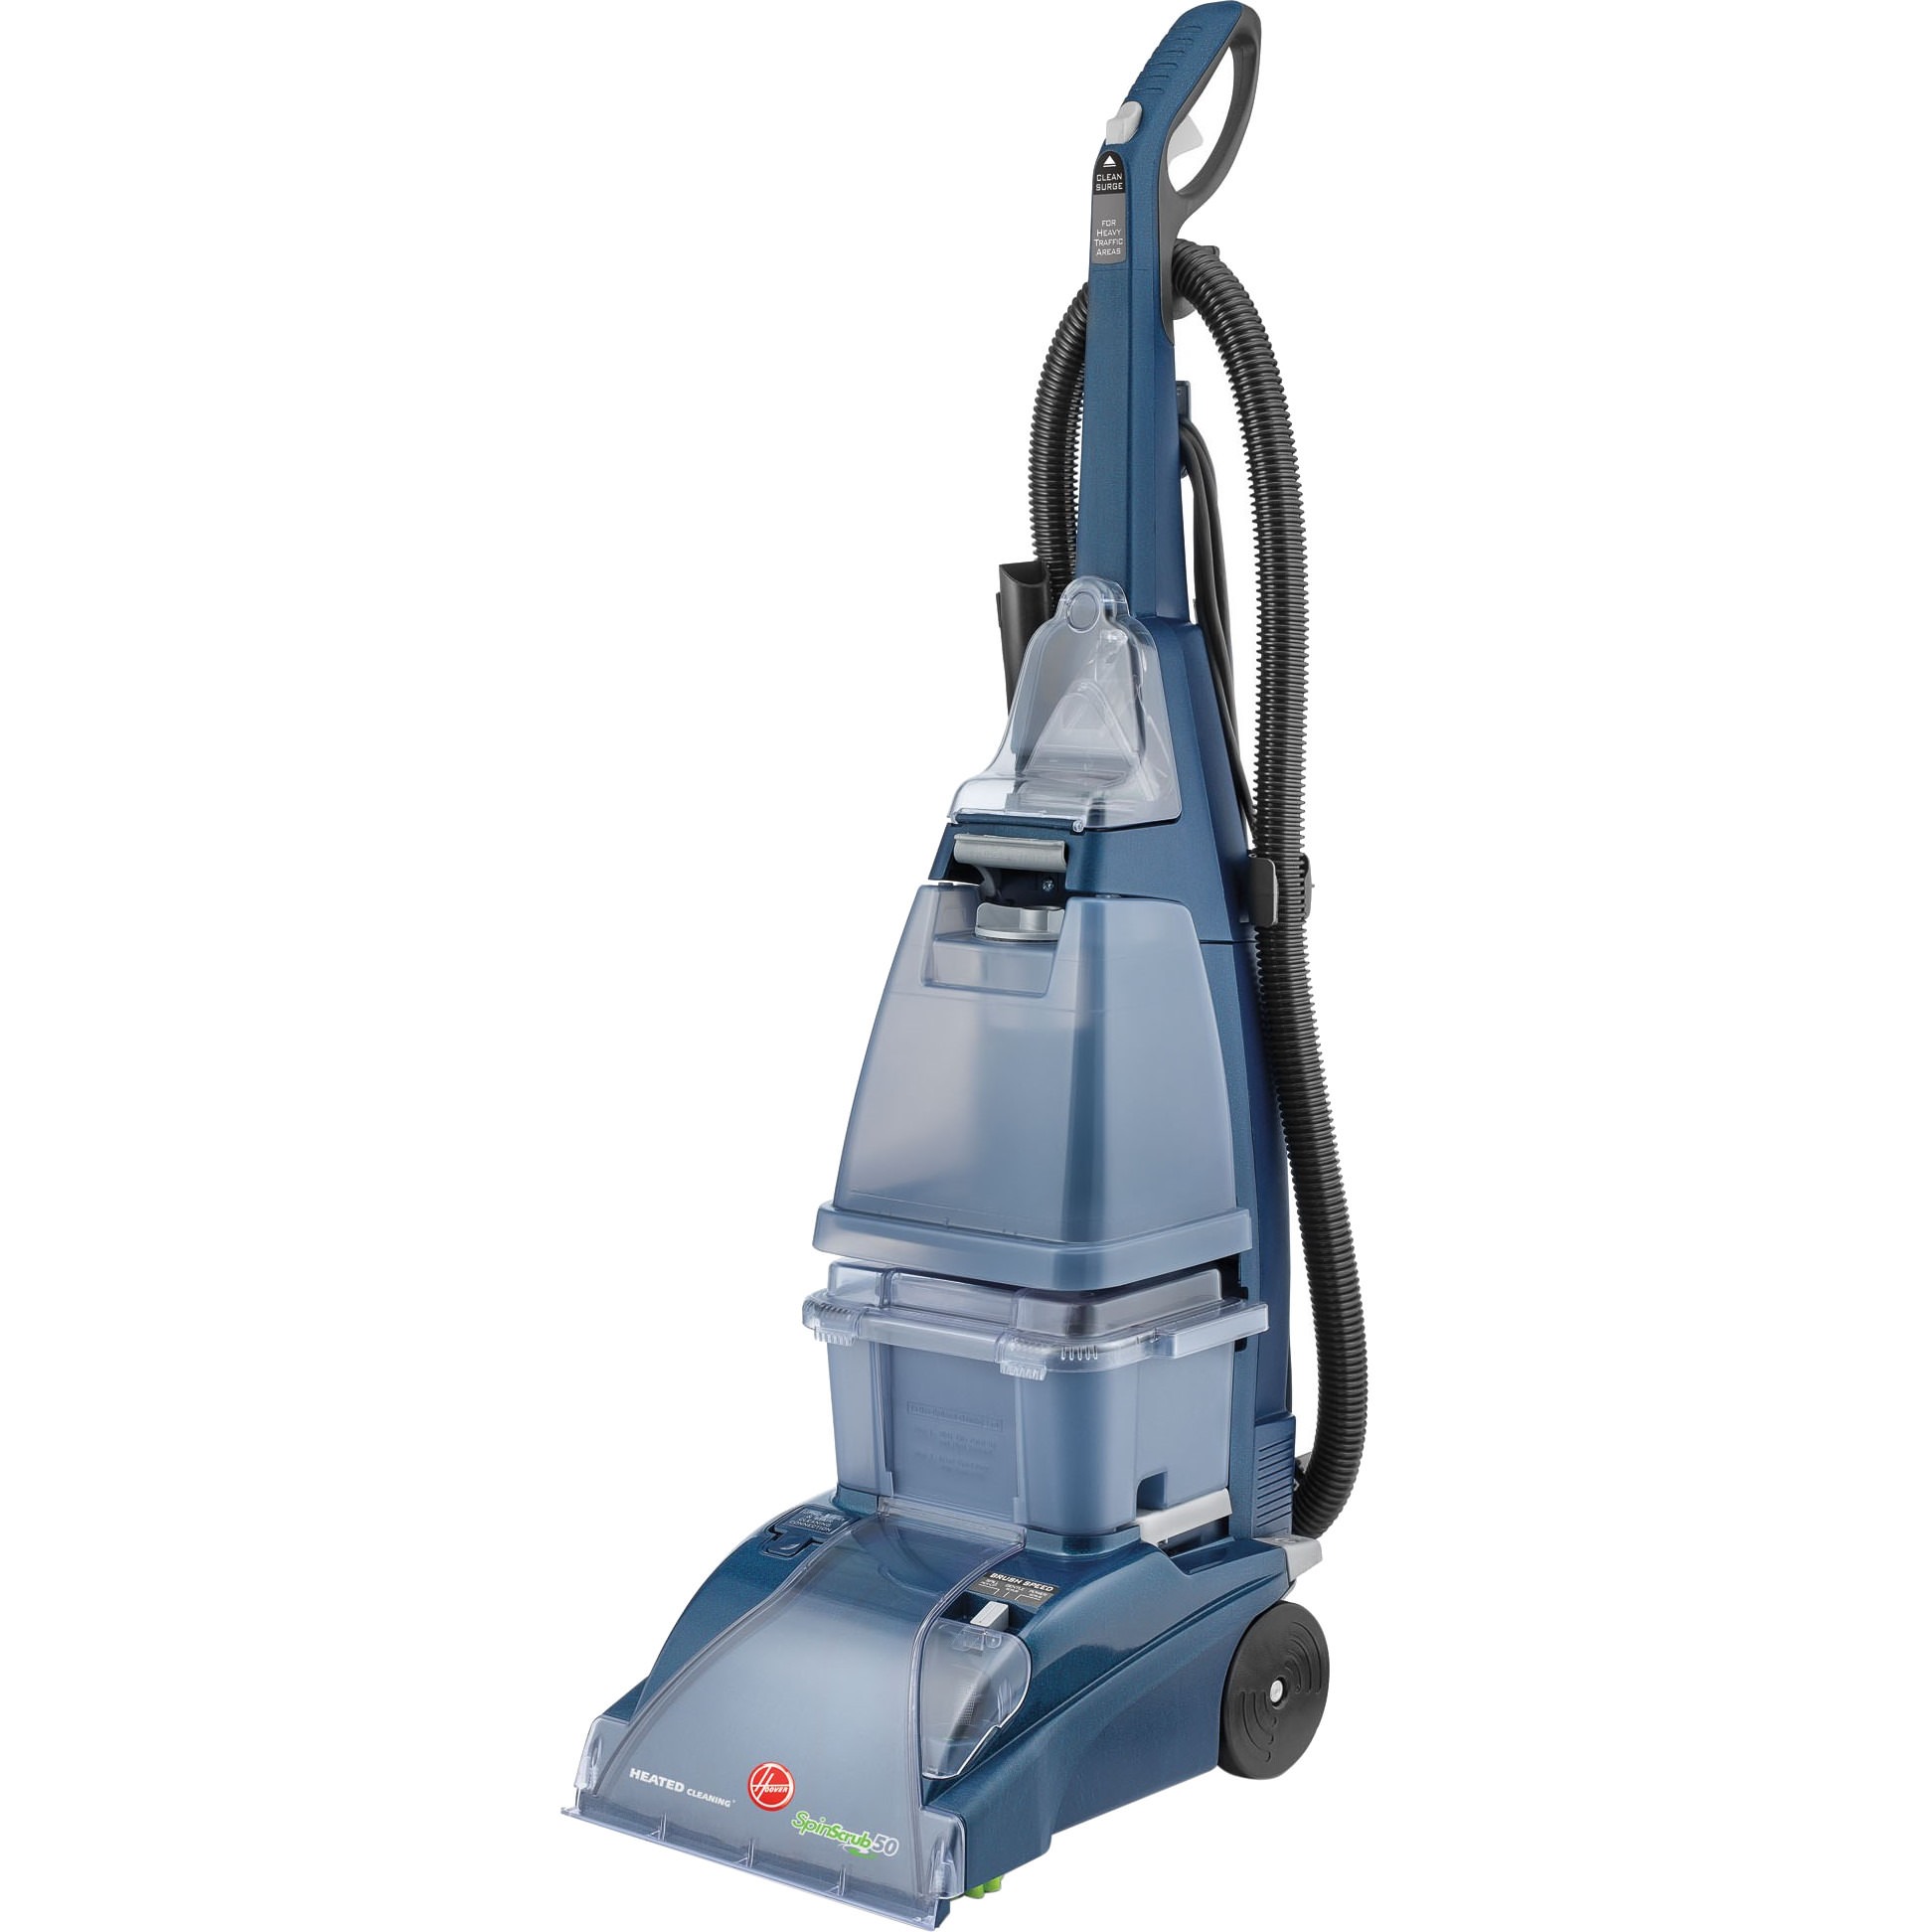 Hoover SteamVac SpinScrub with CleanSurge Carpet Cleaner, F5915905 - image 1 of 5